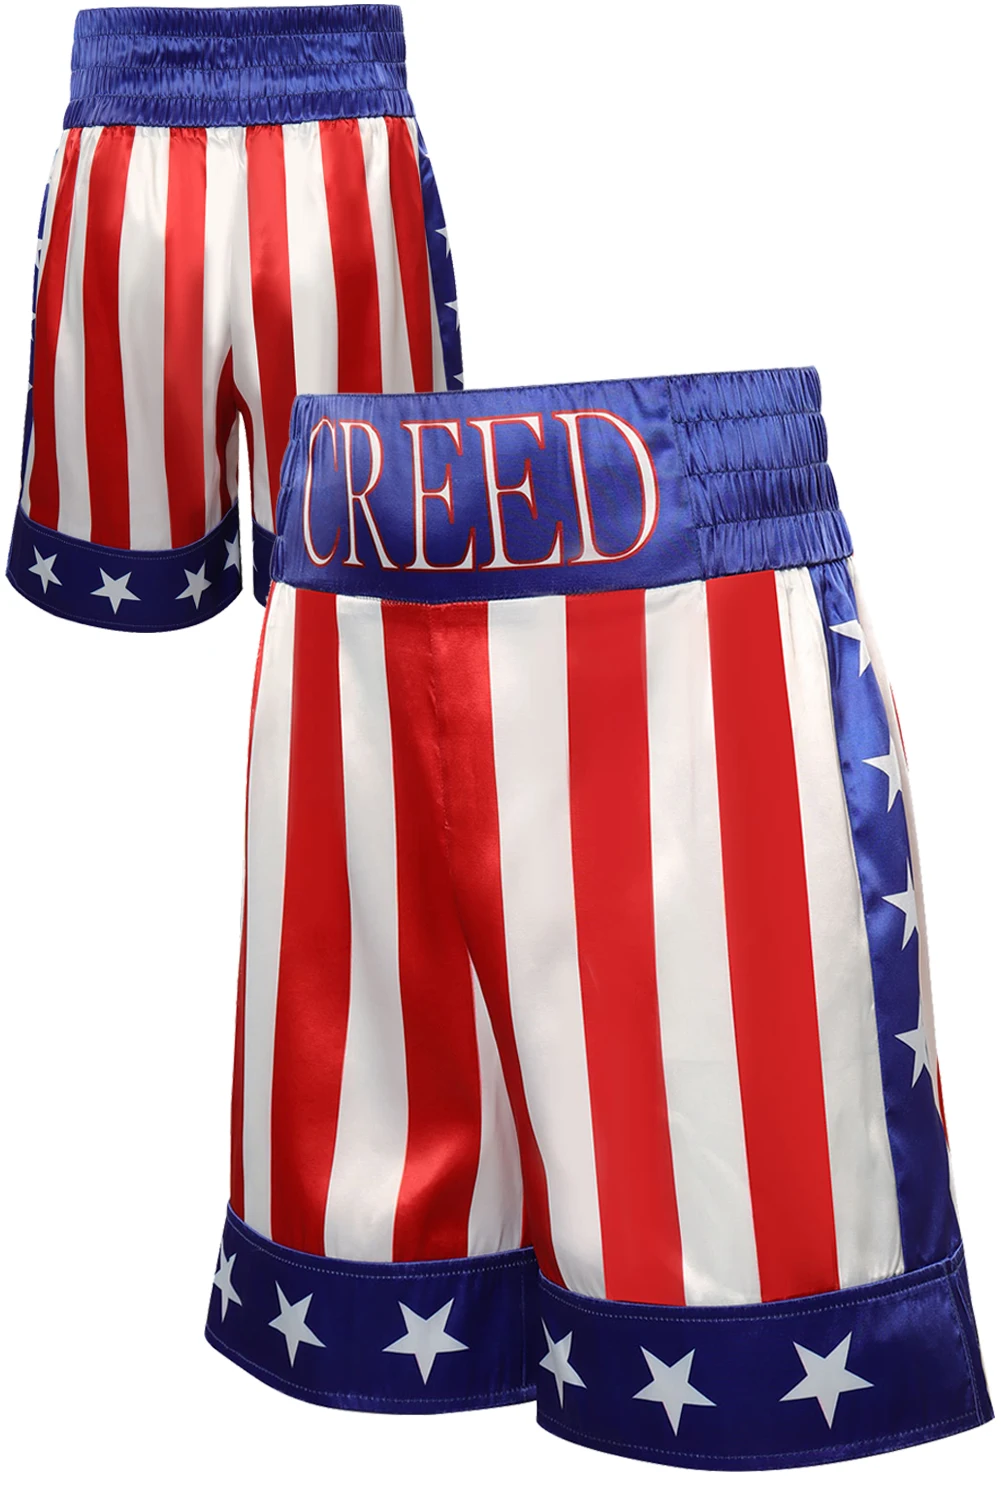 

Adonis Creed Cosplay Boxing Shorts Men Costume Movie Creed III Roleplay Fantasia Male Disguise Fancy Dress Role Playing Fashion